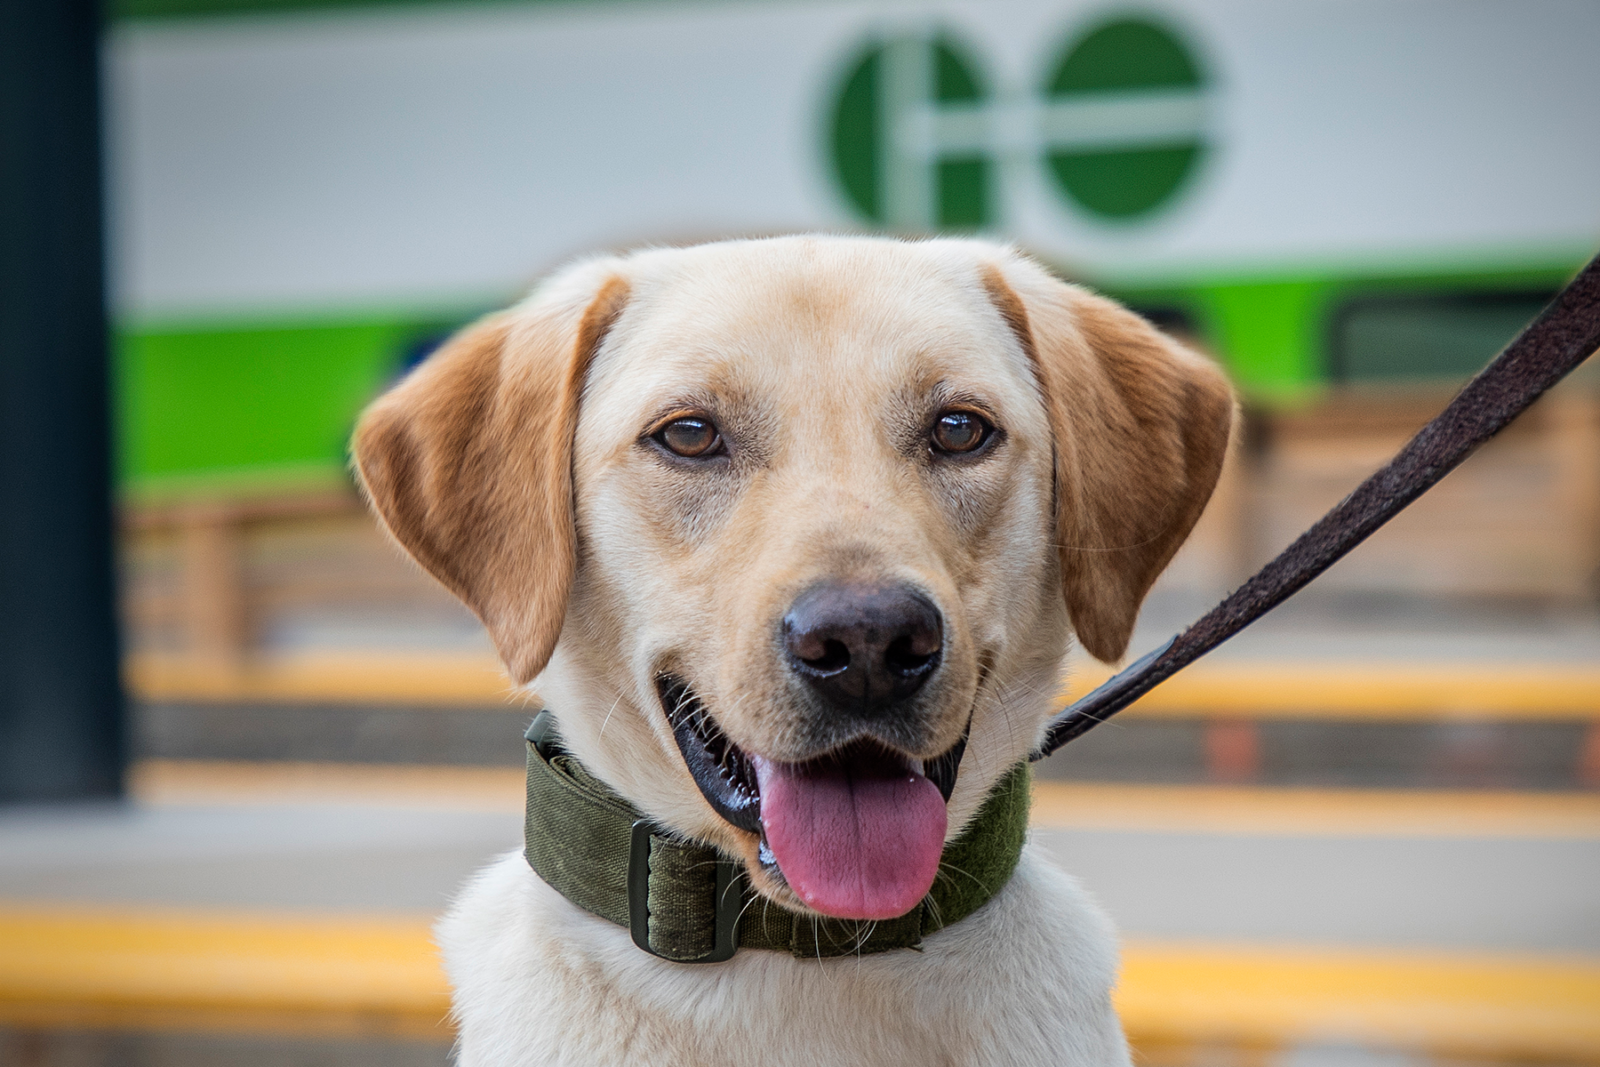 Metrolinx’s K9 Unit Puts Powerful – and Cute – New Face on Public Safety